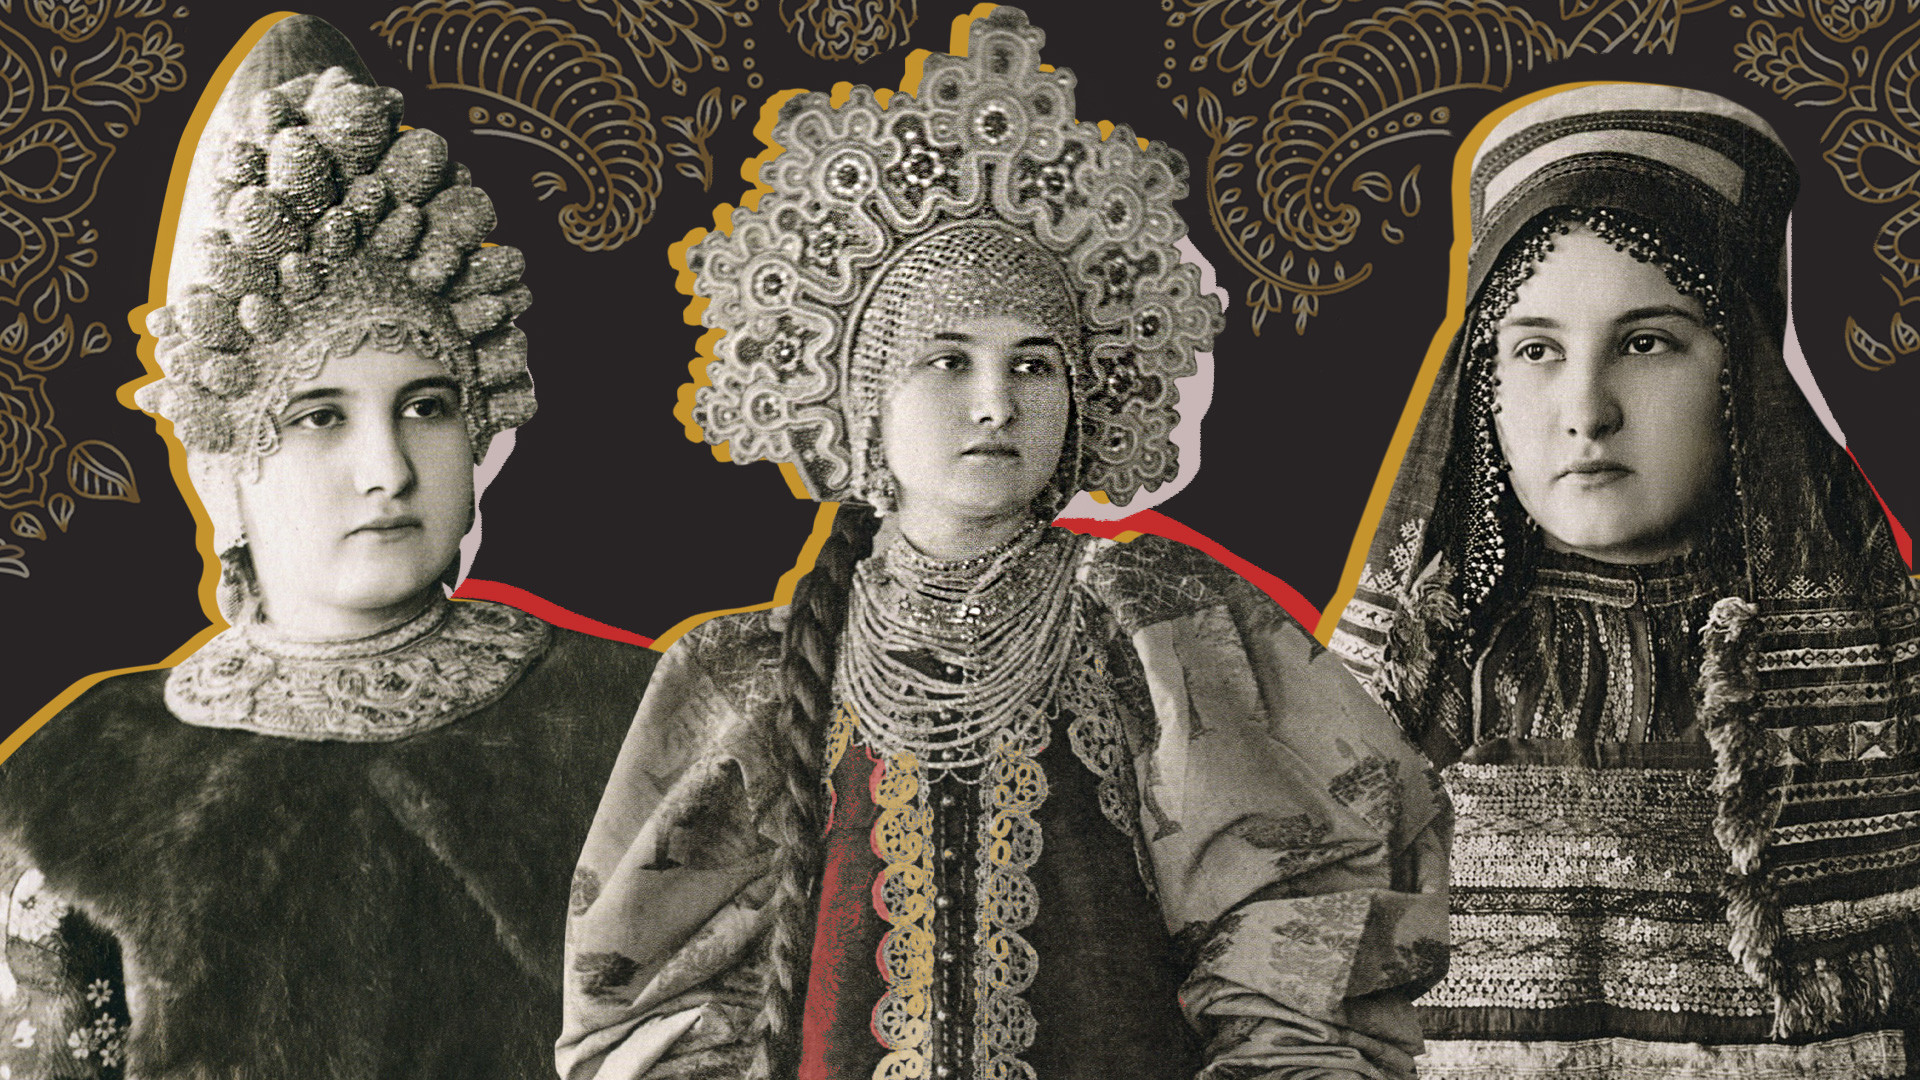 Traditional female costumes from all over the Russian Empire